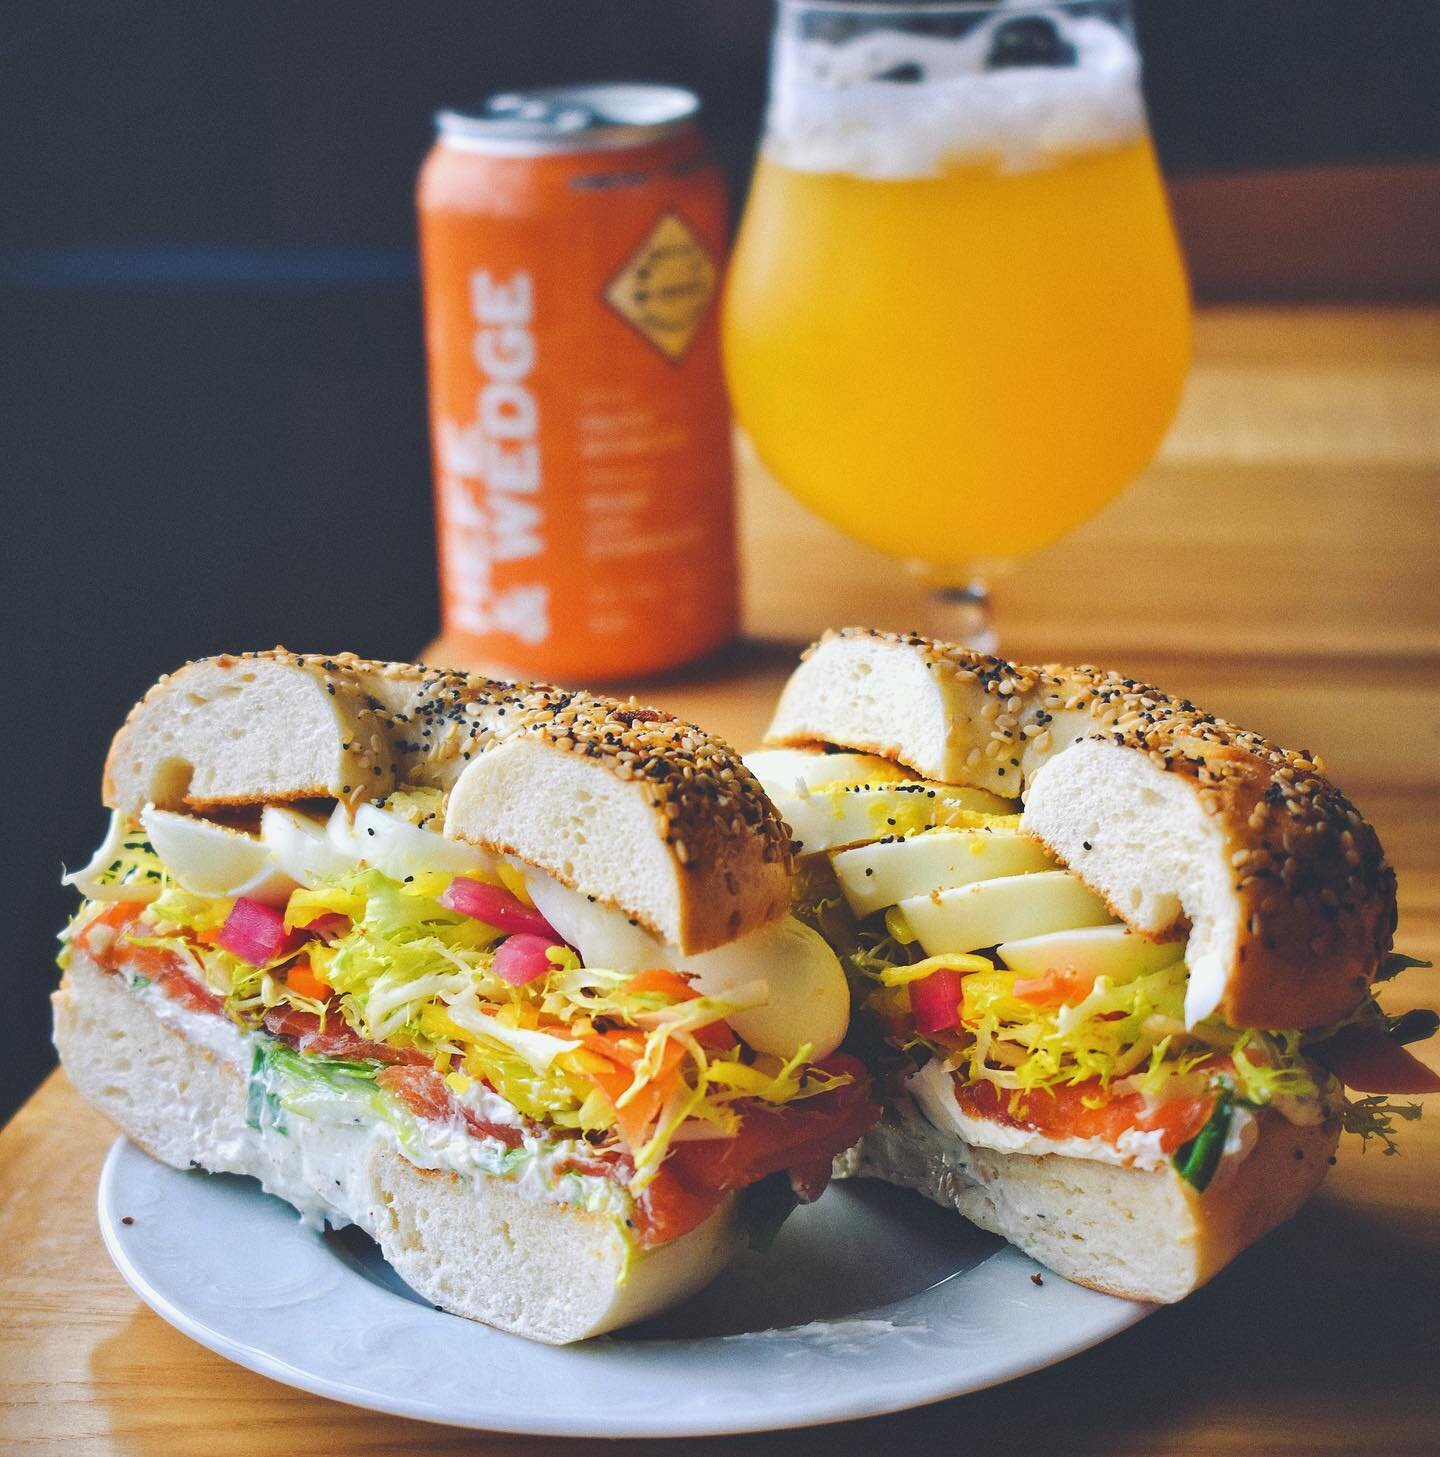 If you roll out of bed and want to do curbside pickup for a bagel sammy + Beermosa kit in your PJs, no judgement. Seriously. 
Brunch service 10am-3p ☀️